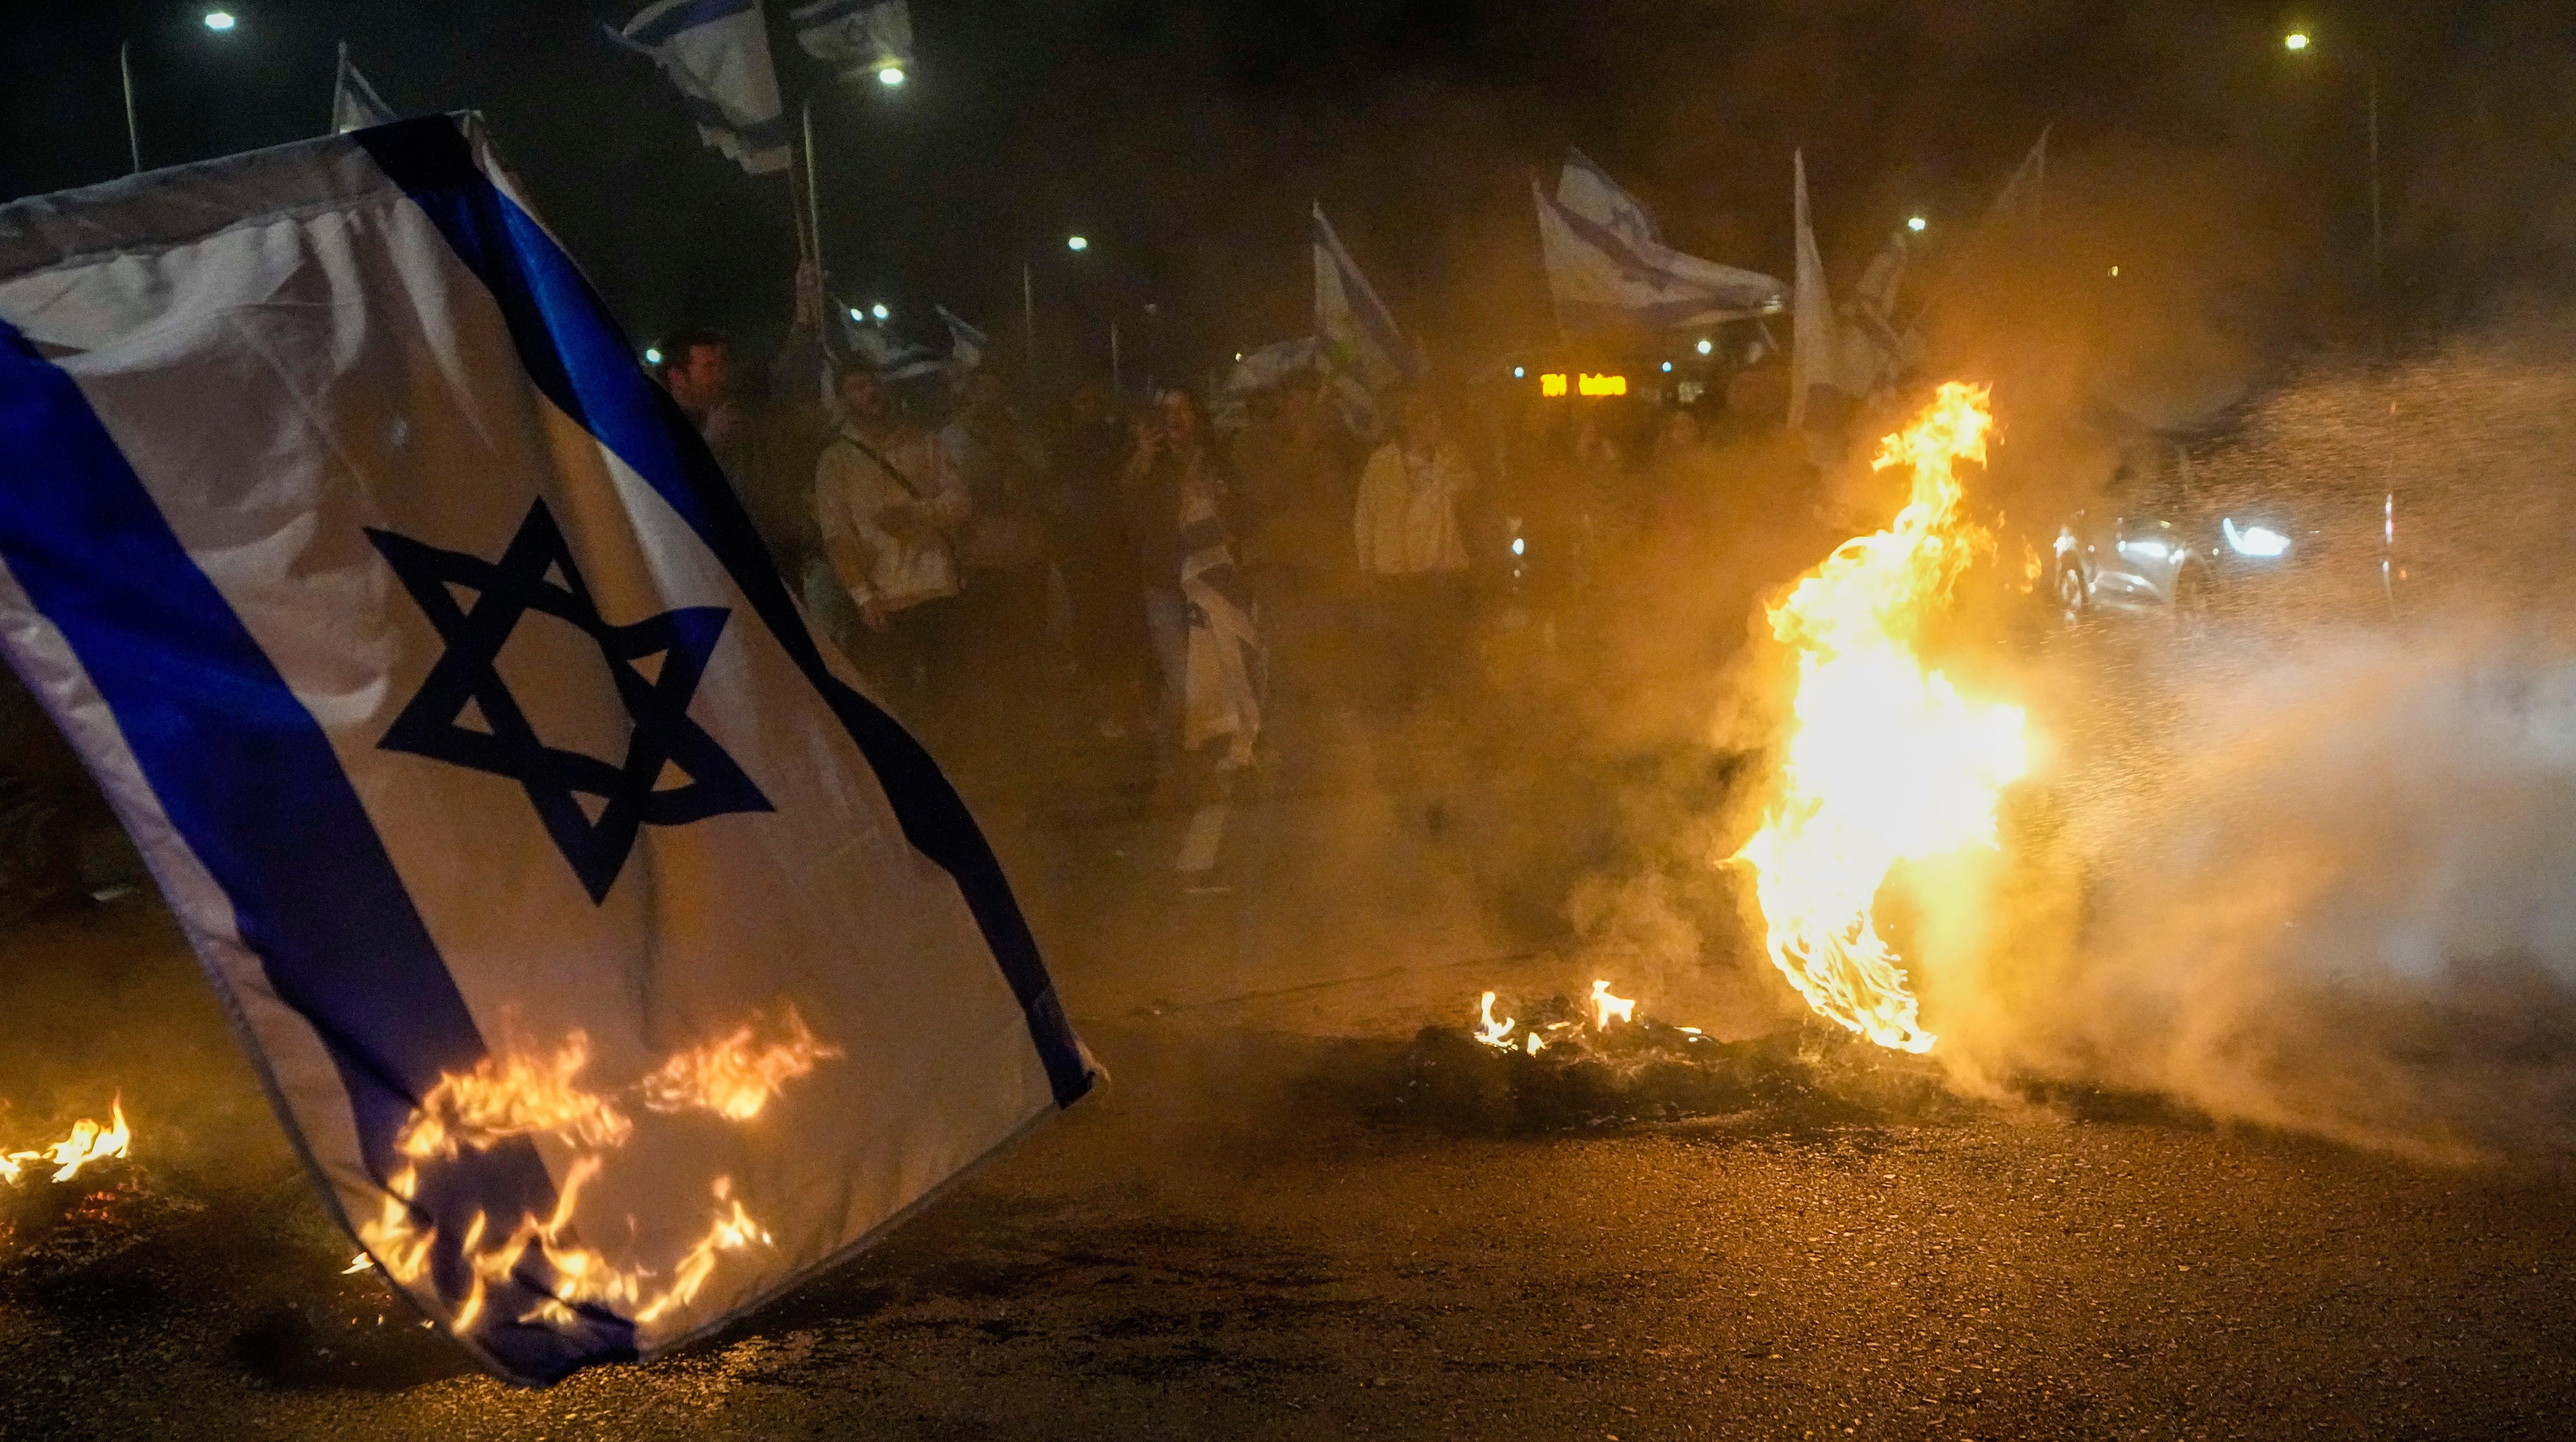 Anti-government protestors took to the streets in Beit Yanai, Israel to oppose Prime Minister Benjamin Netanyahu's judicial overhaul plan. (Photo: Ariel Schalit, AP)